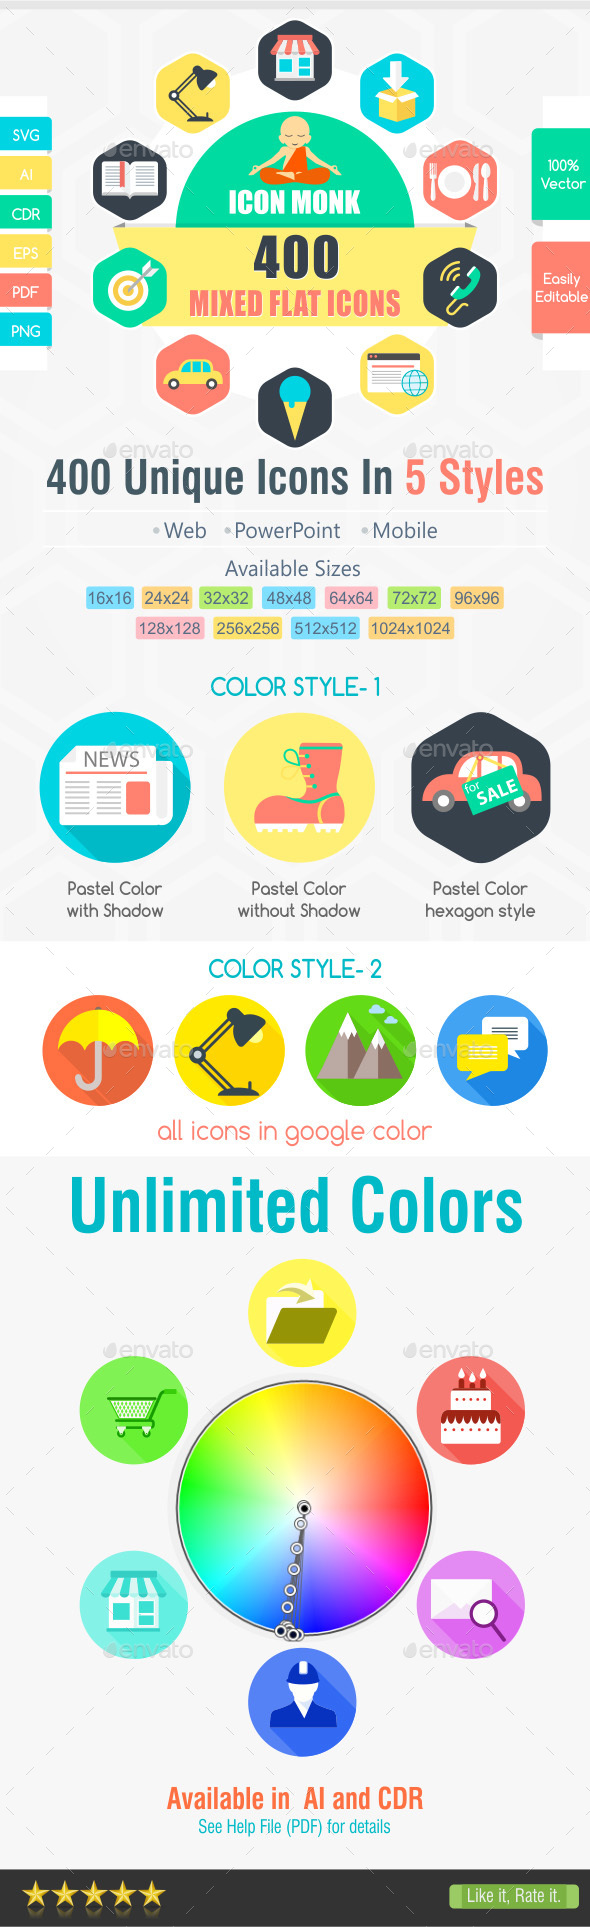 400 Icons with Unlimited Colors